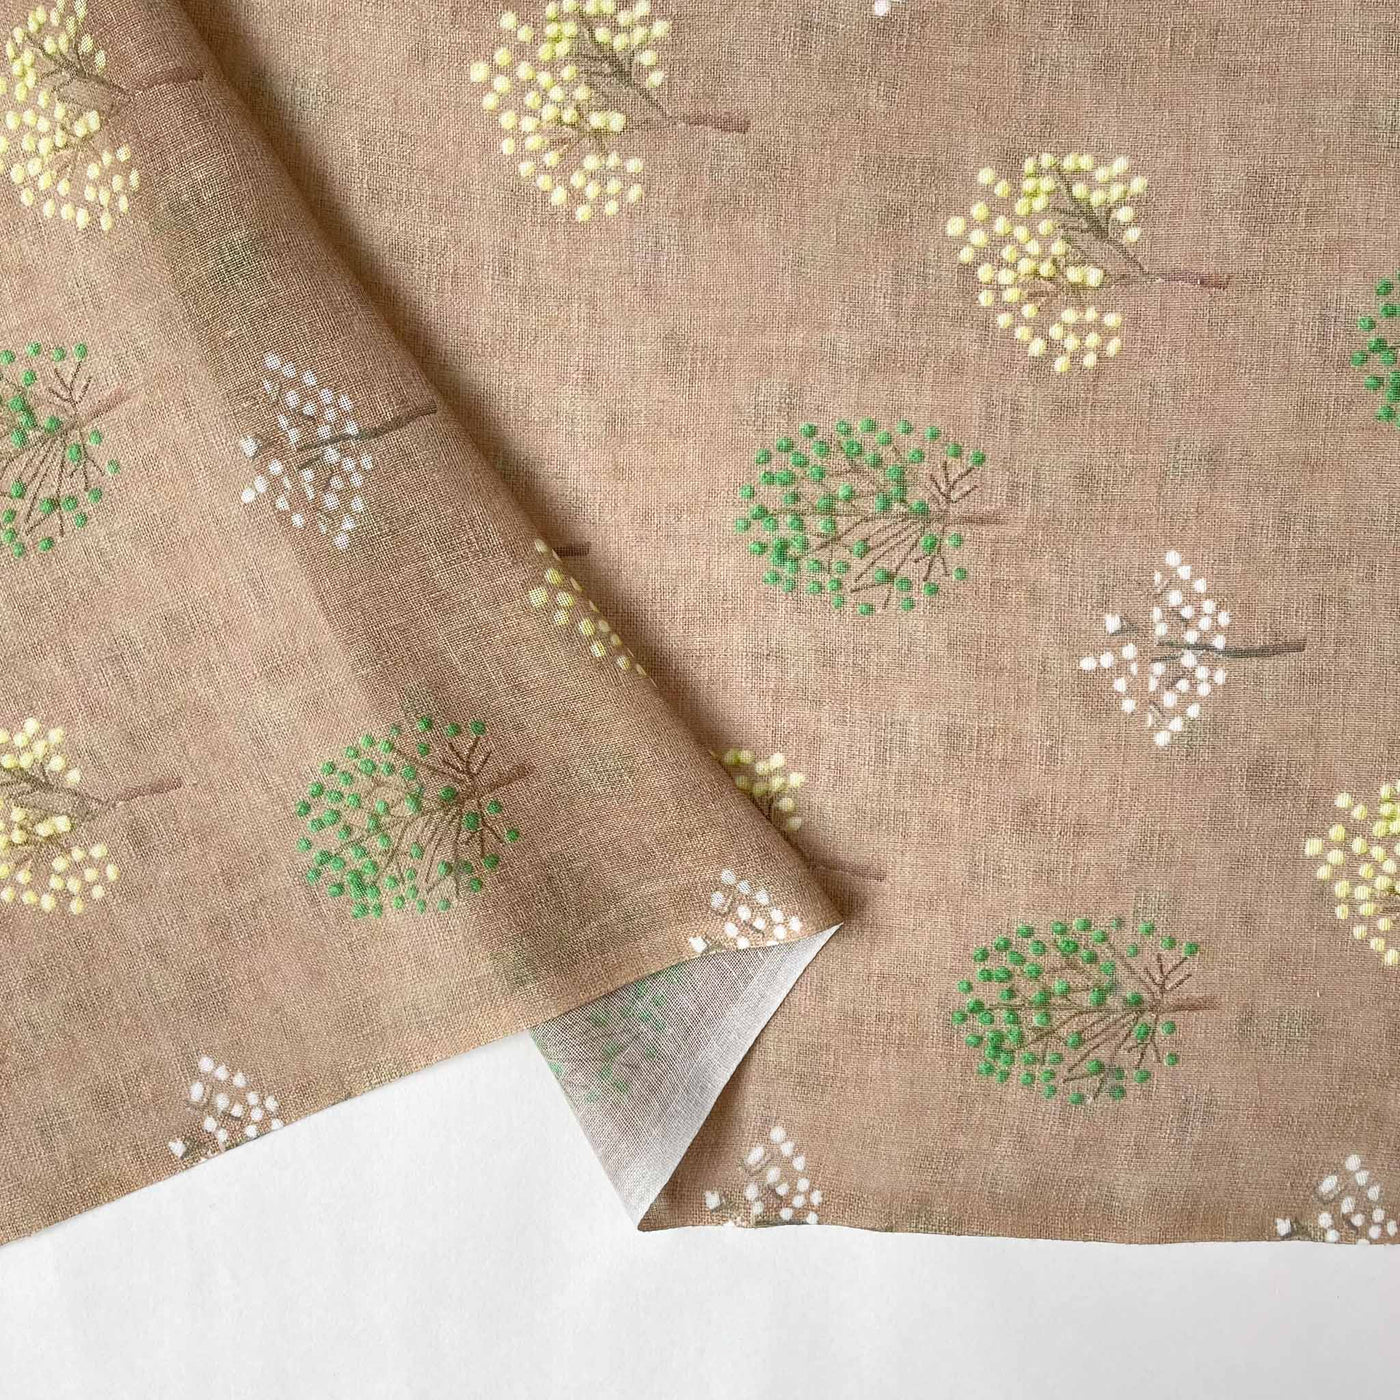 Fabric Pandit Cut Piece (Cut Piece) Beige and Green Fresh Apple Trees Digital Printed Linen Neps Fabric (Width 44 Inches)